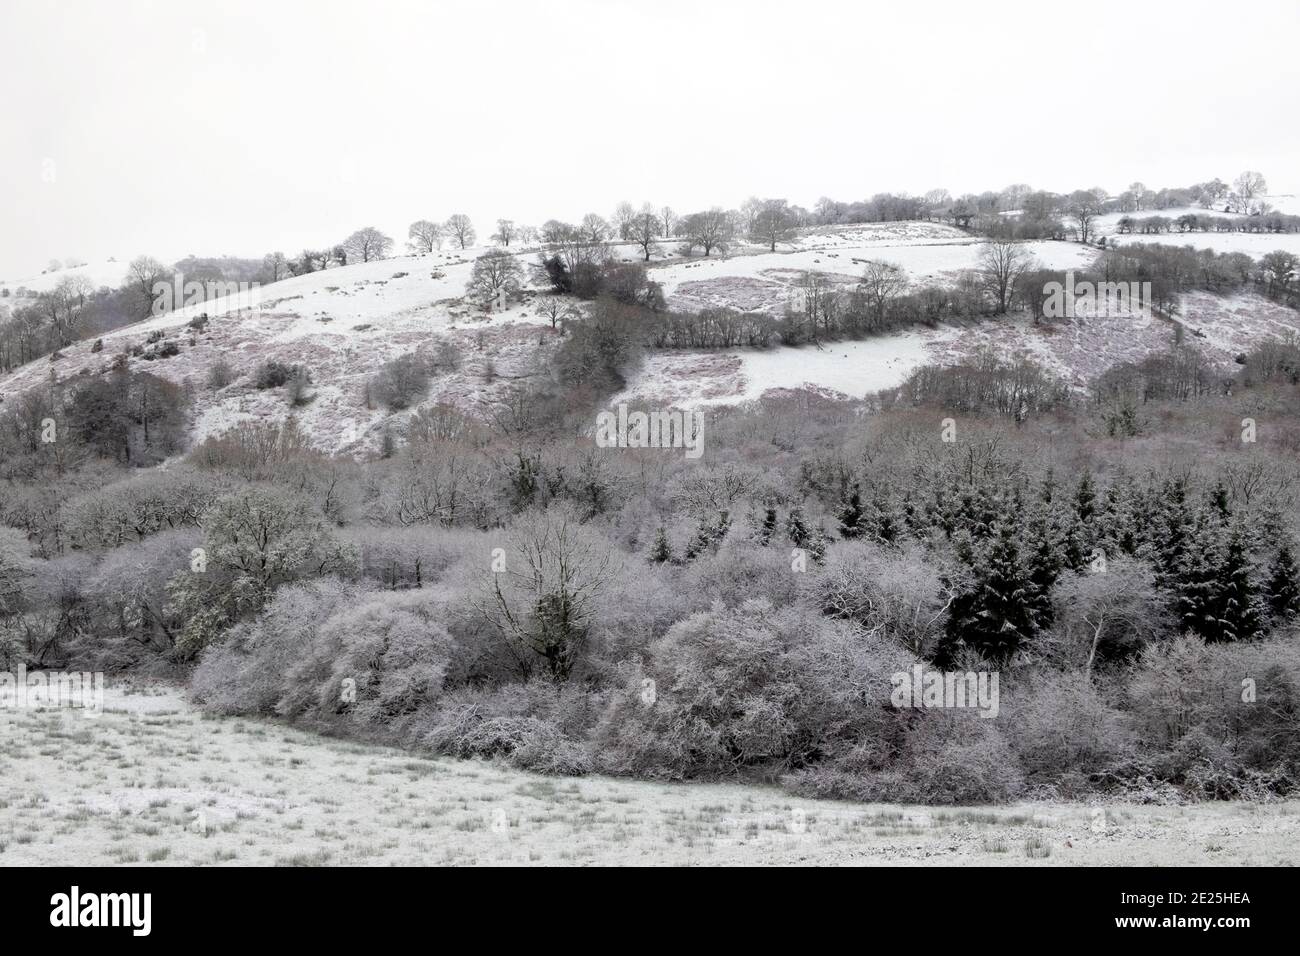 Winter snow in rural Carmarthenshire countryside December 2020 Wales UK   KATHY DEWITT Stock Photo